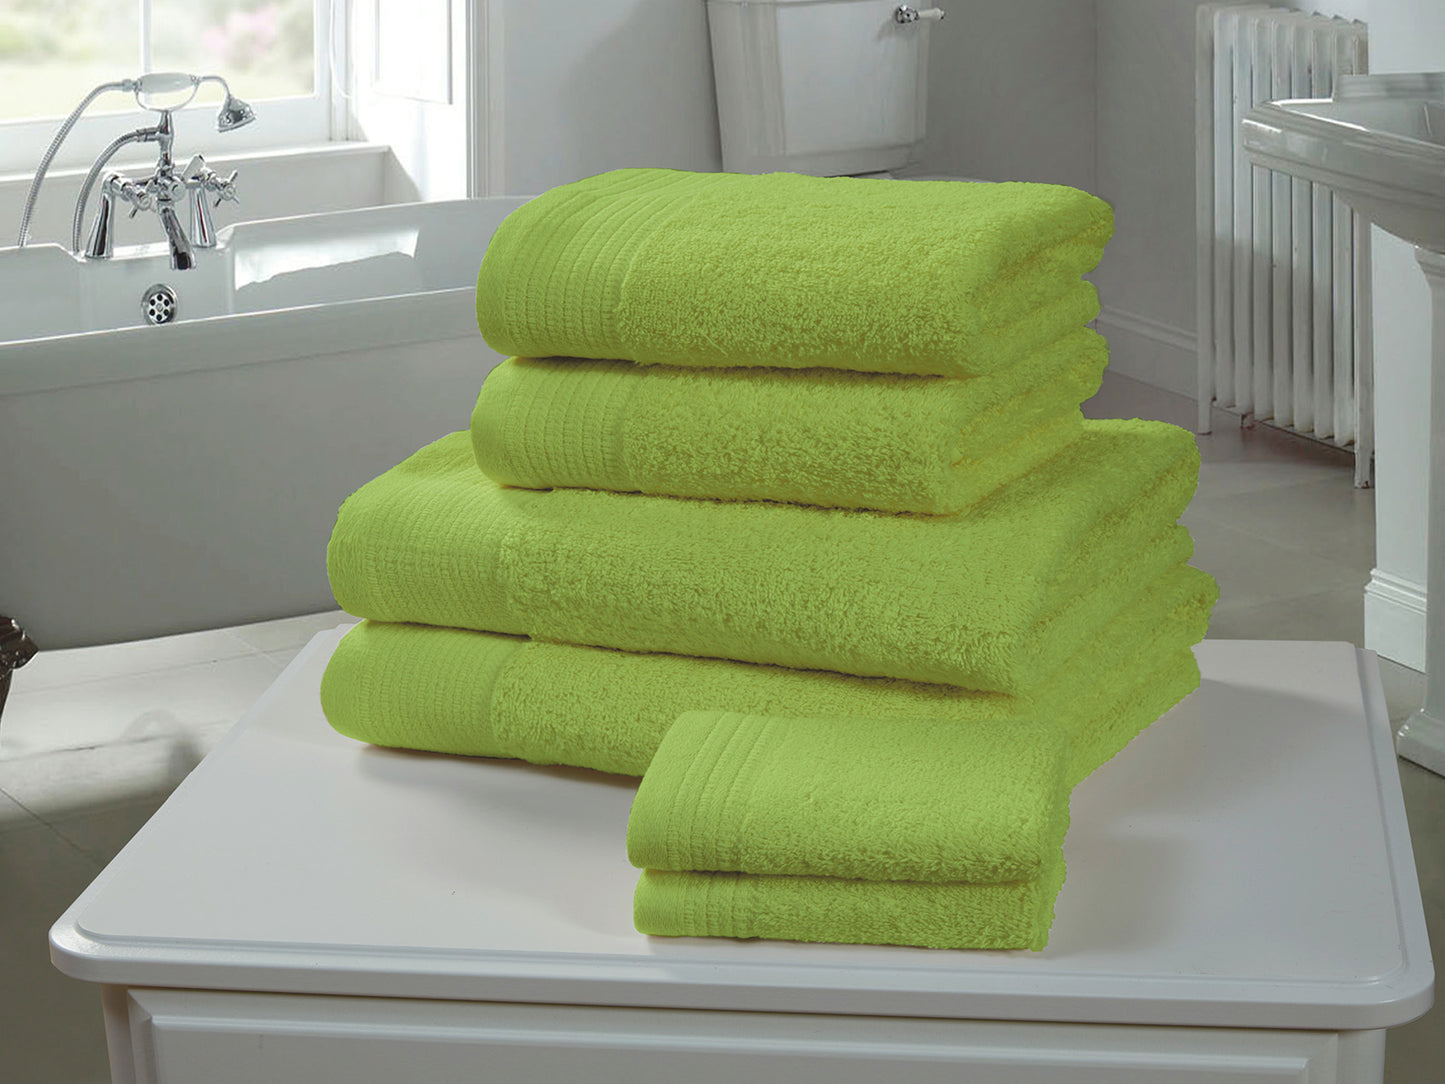 Chatsworth 100% Egyptian Cotton Bathroom Towels 600gsm Lime